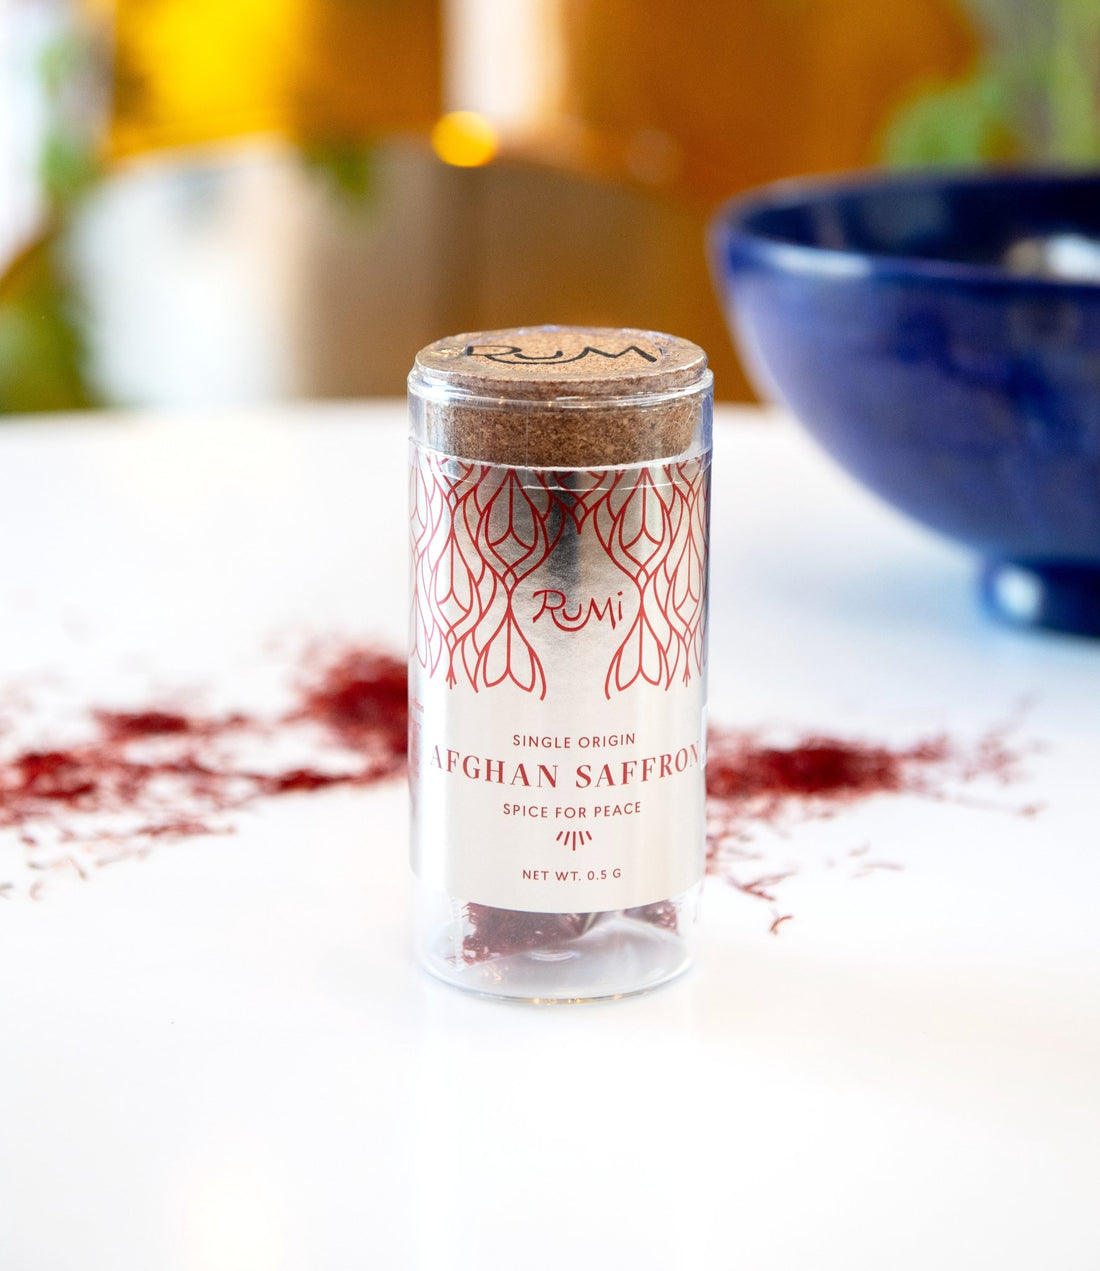 Whole Foods 2019 Trends Report - Rumi Spice